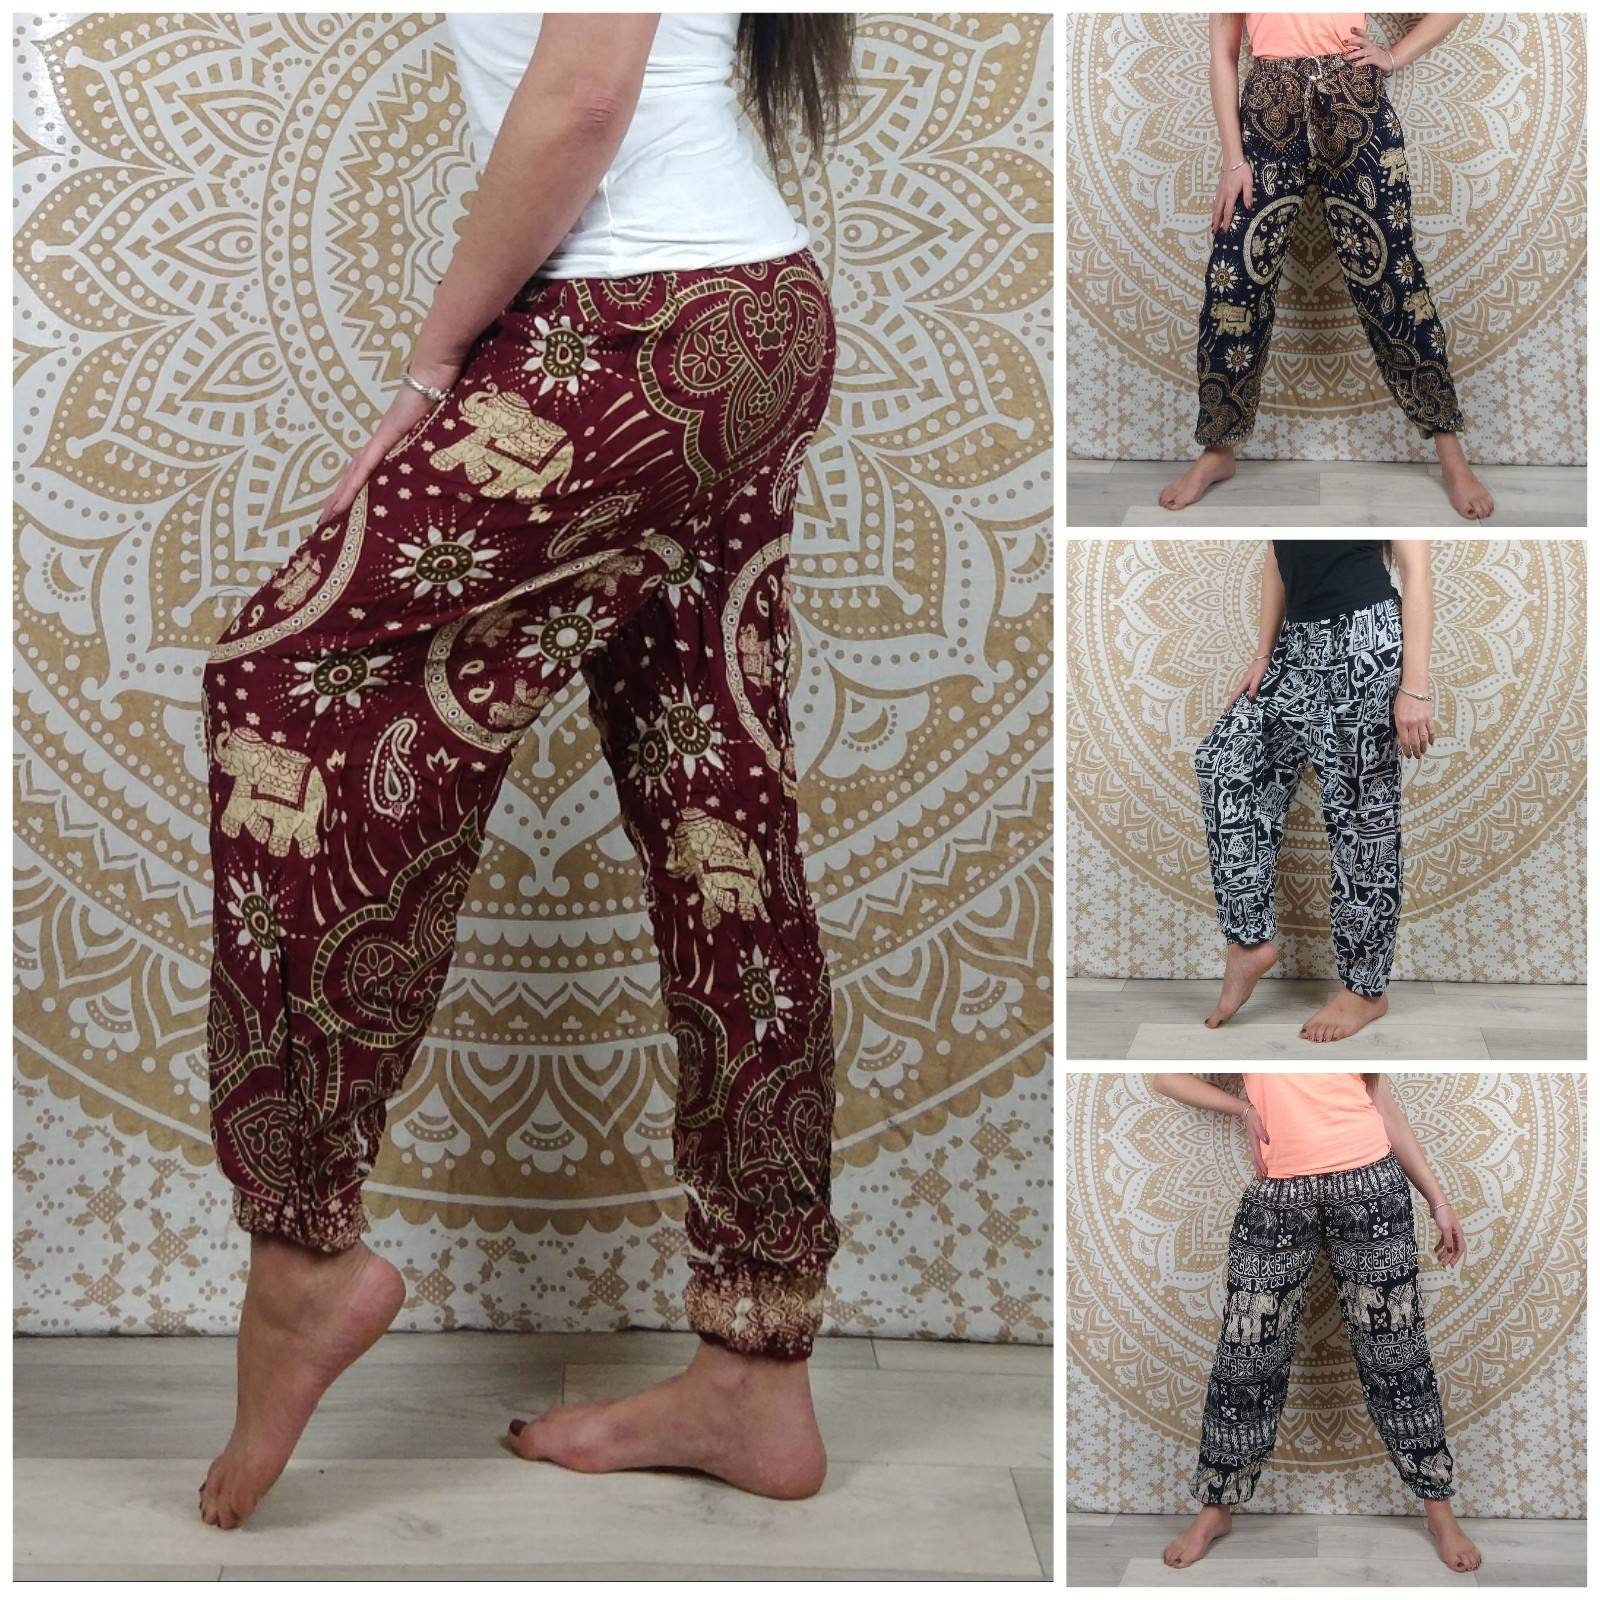 Paisley Thai Hill Tribe Fabric Women's Harem Pants with Ankle Straps